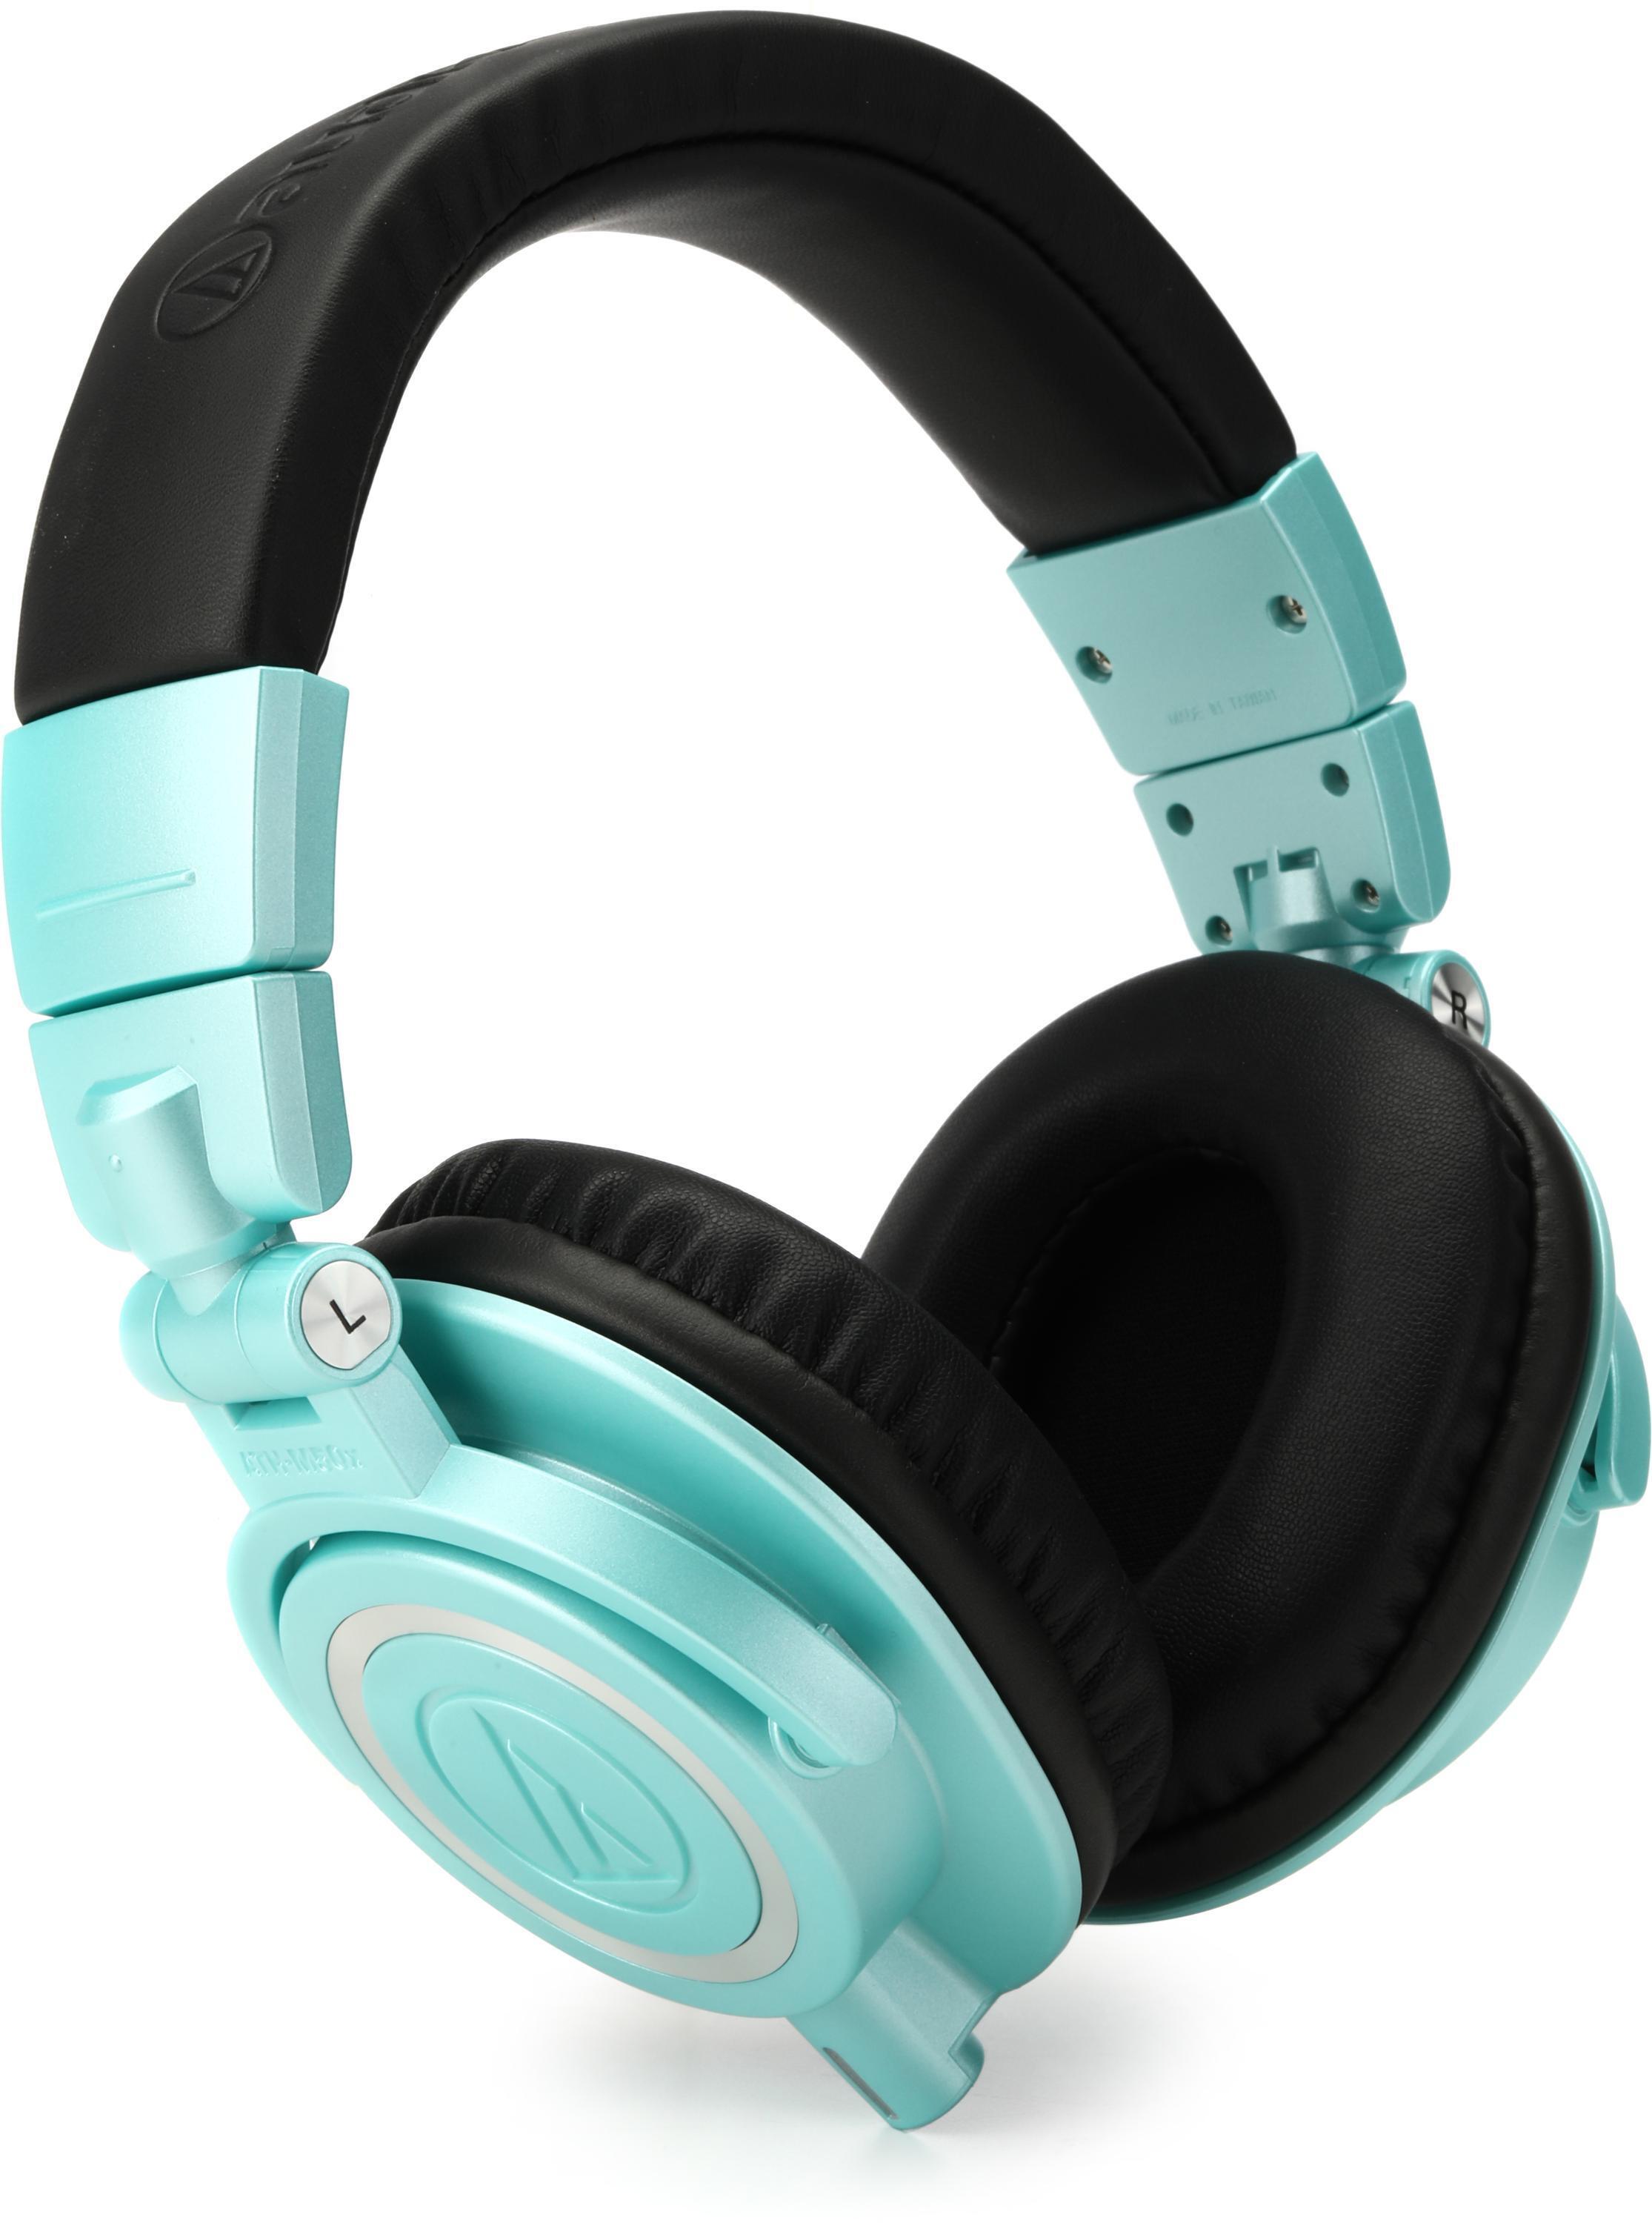 Audio-Technica Releases Limited-Edition ATH-M50x Headphones